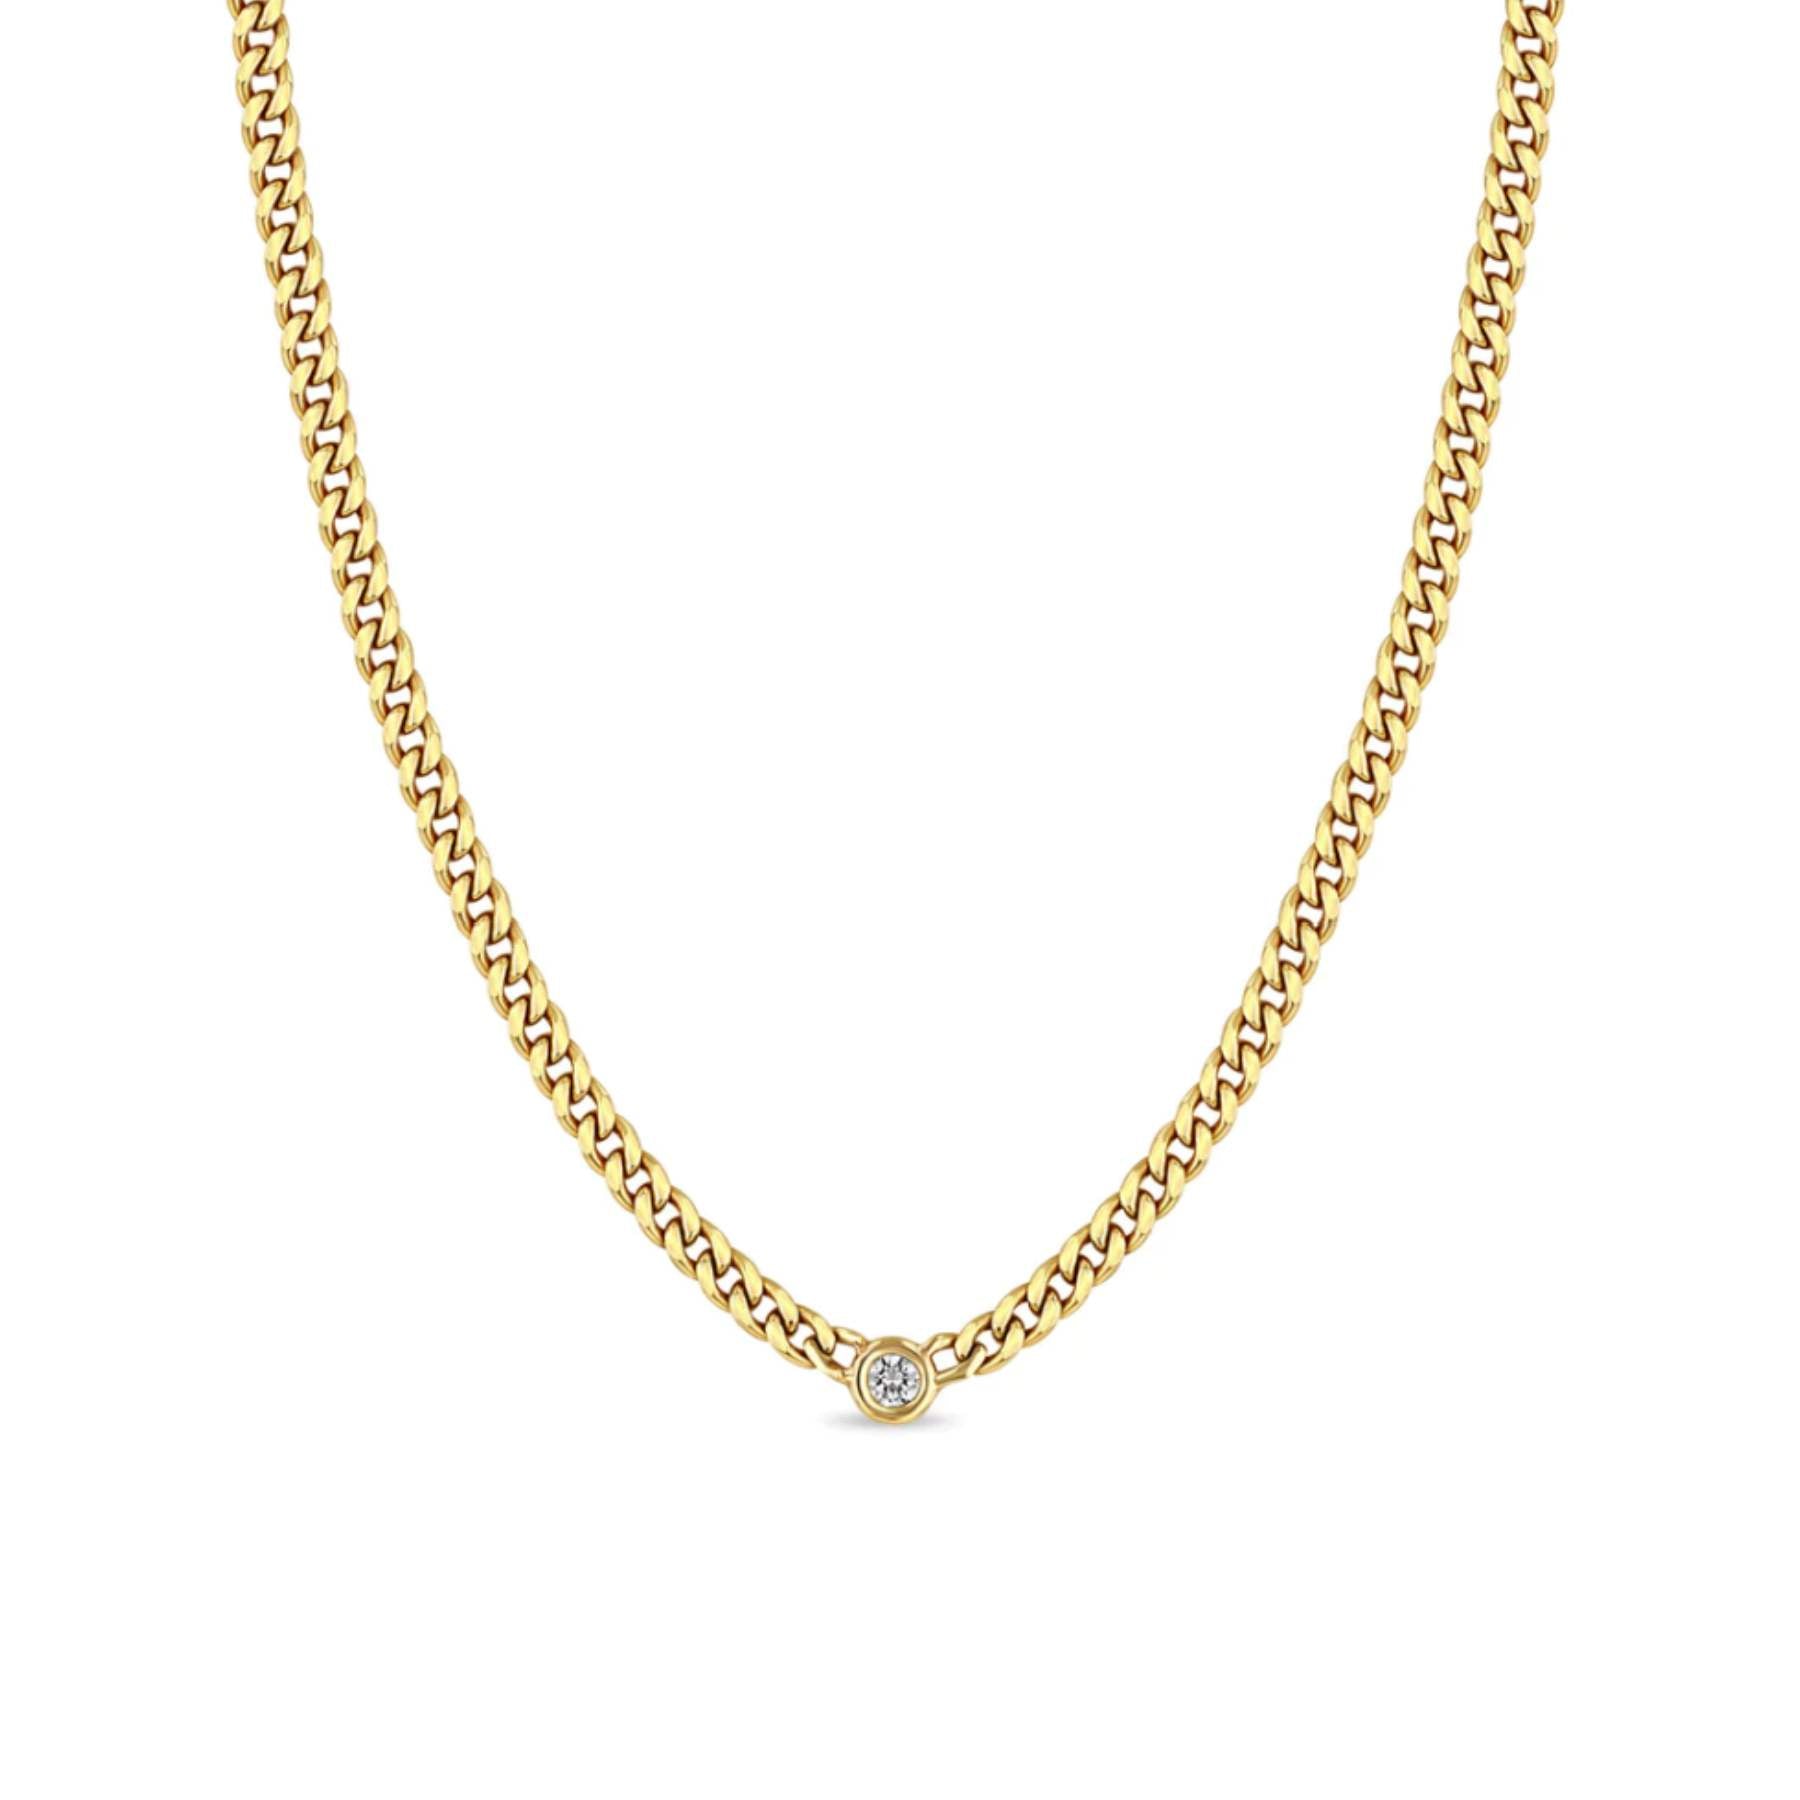 Zoe Chicco 14k Small Curb Chain Necklace with Floating Diamond